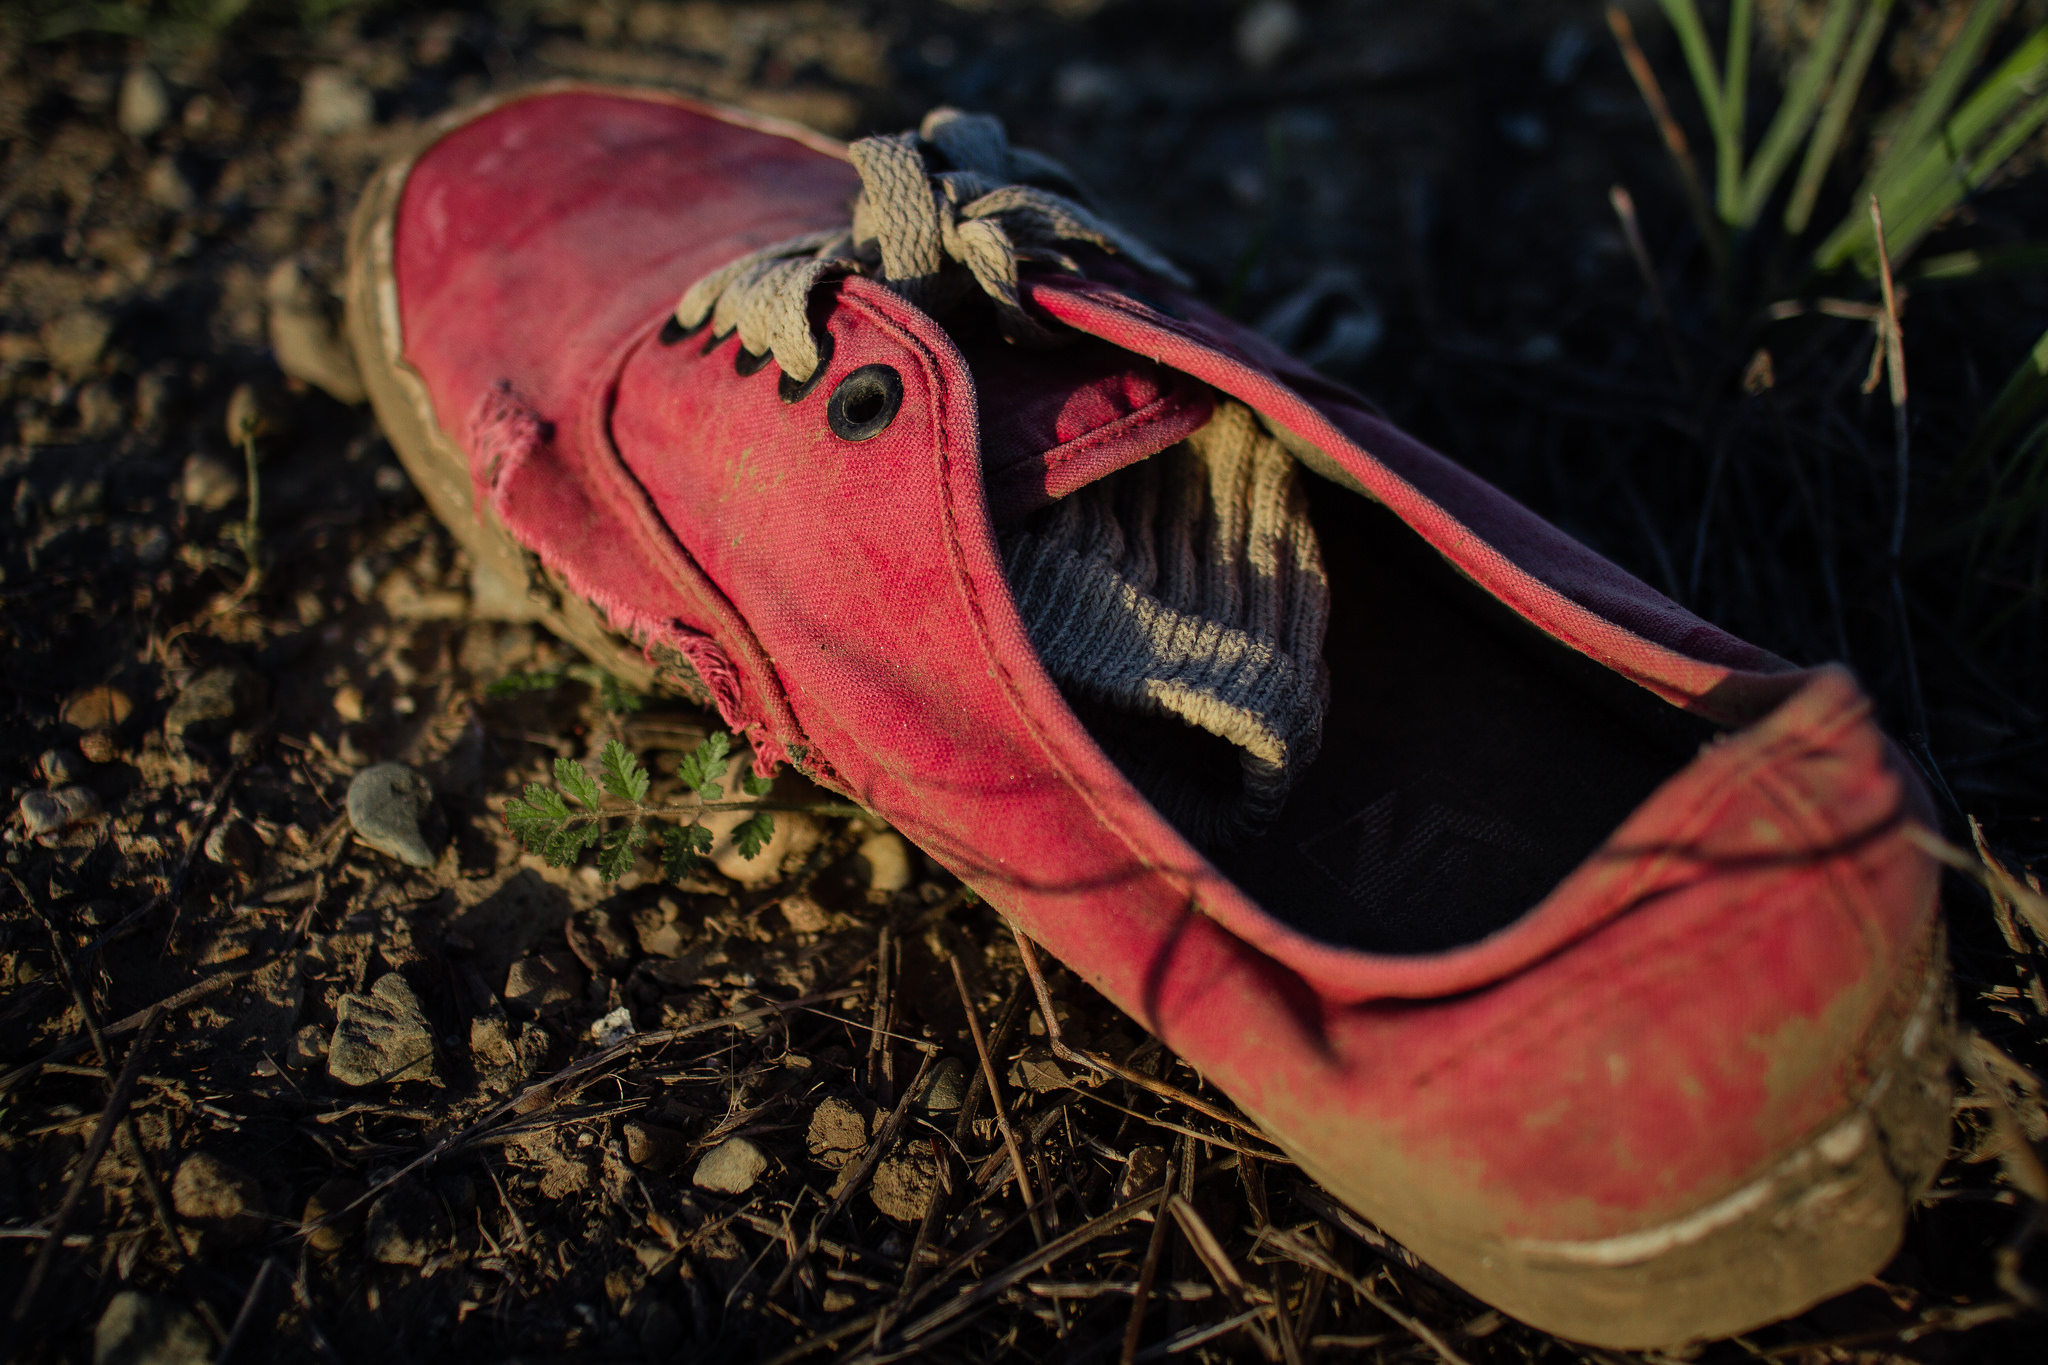 "Dirty Red Shoe" © Scott Hart; Creative Commons license